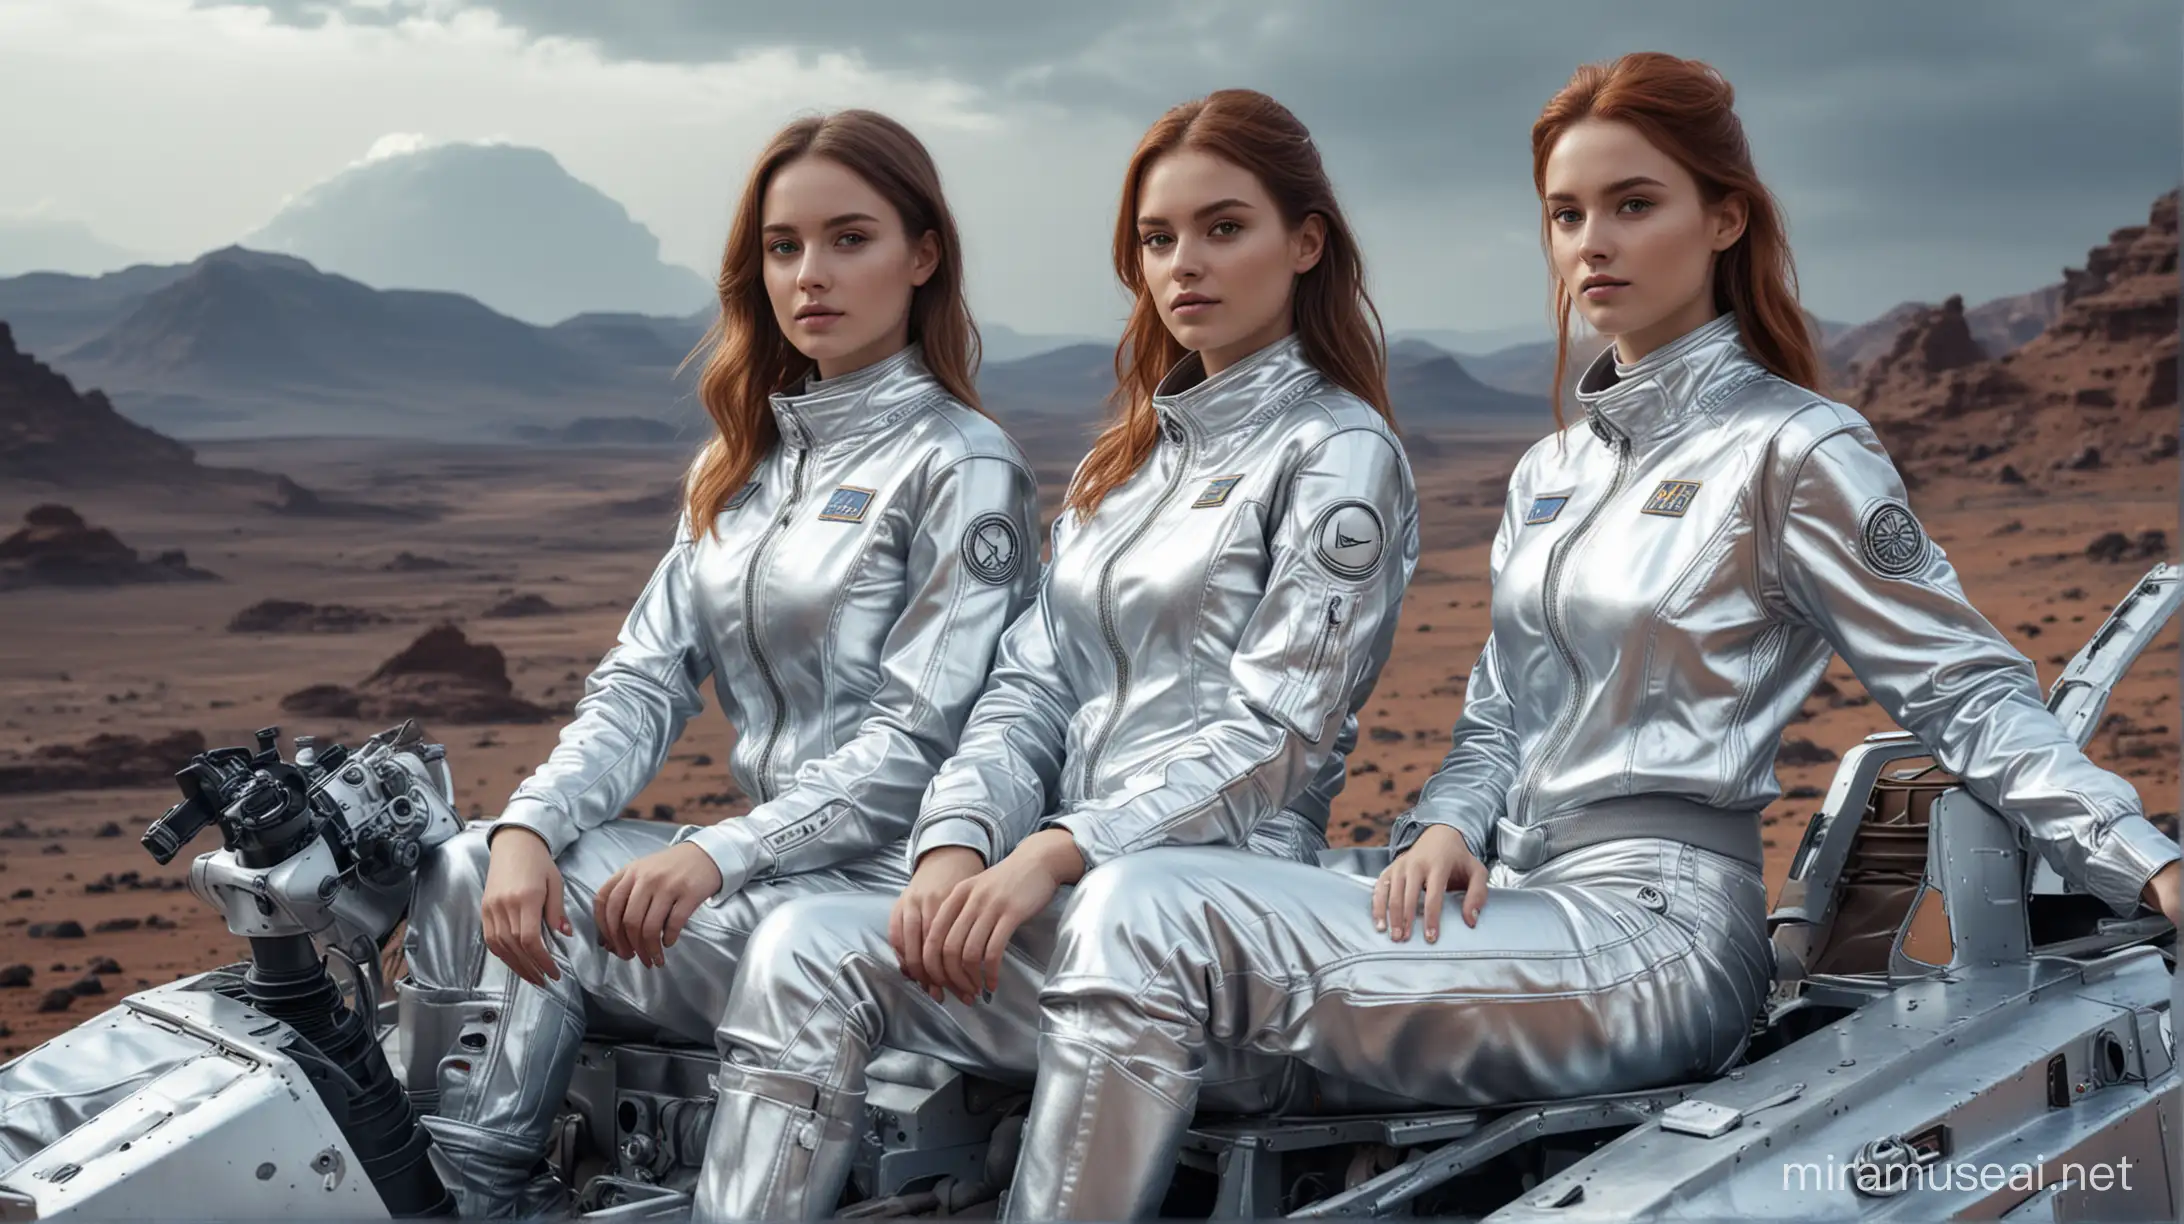 photo realistic, high quality, three young women, european faces, wearing silver metallic jackets and pants, sitting on the sci-fi rover, background is surface of far planet with blu-white sky, beautiful color landscape.